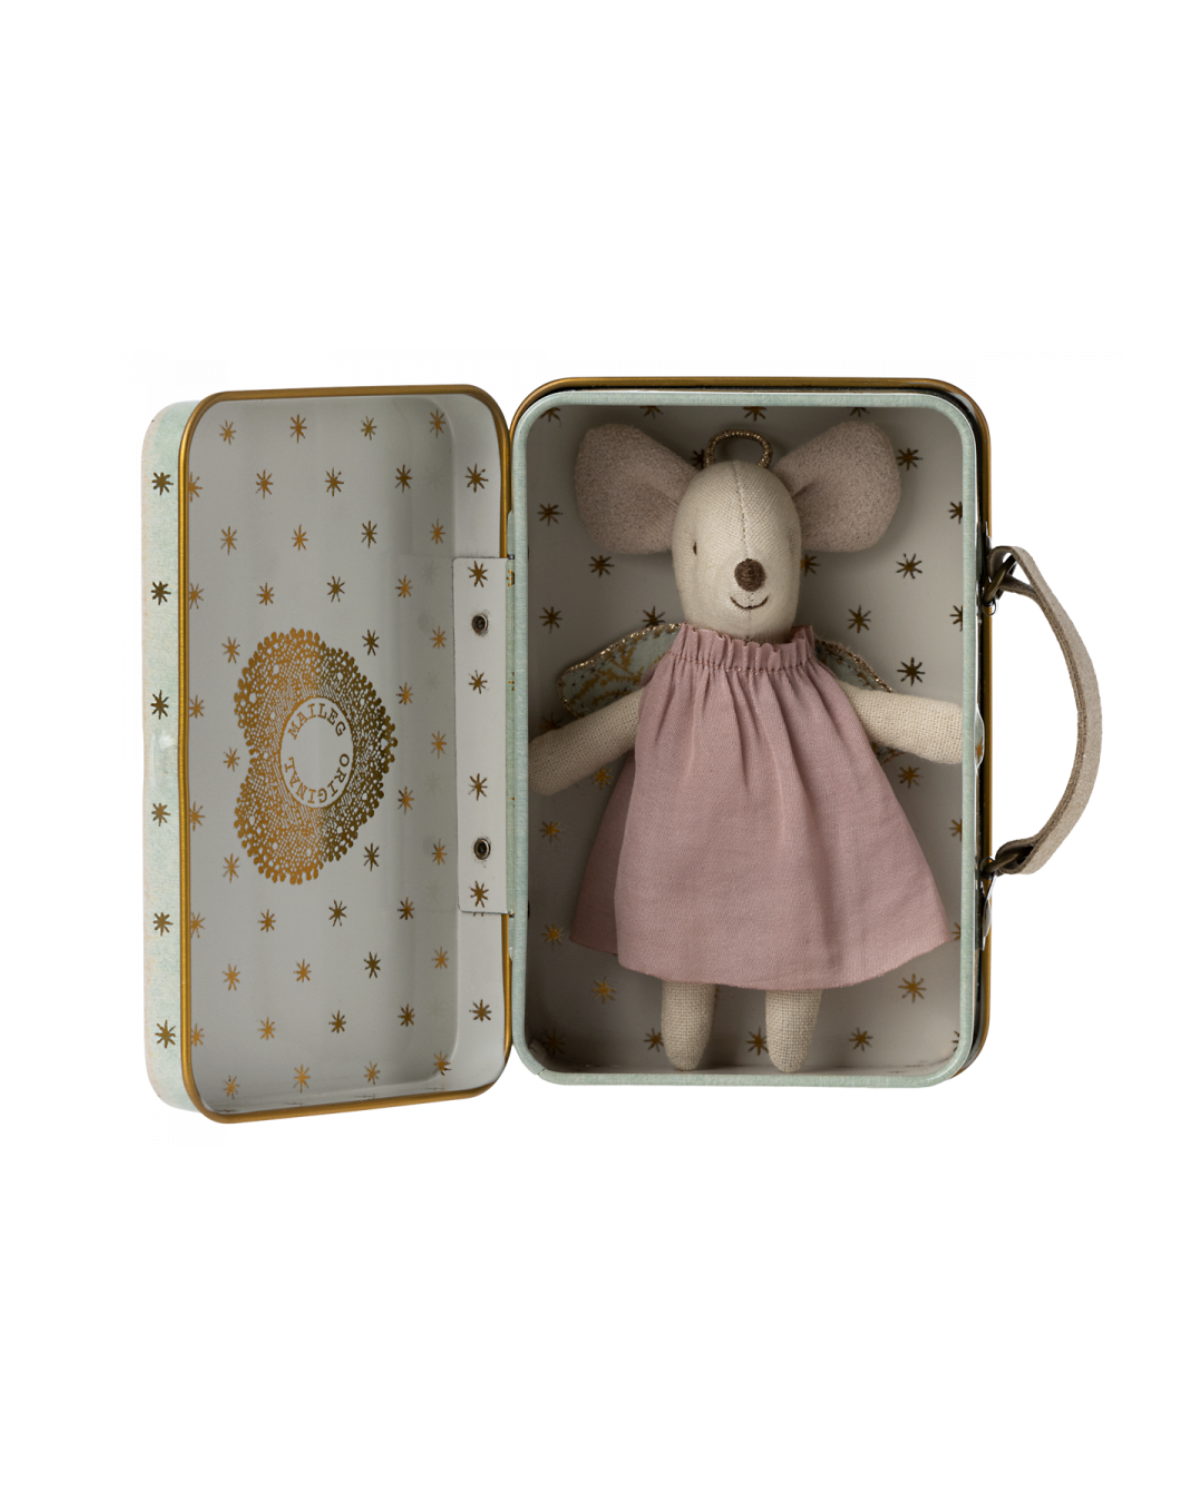 Maileg toys: Angel Mouse in Suitcase - Heavenly Doll for Kids' Playtime